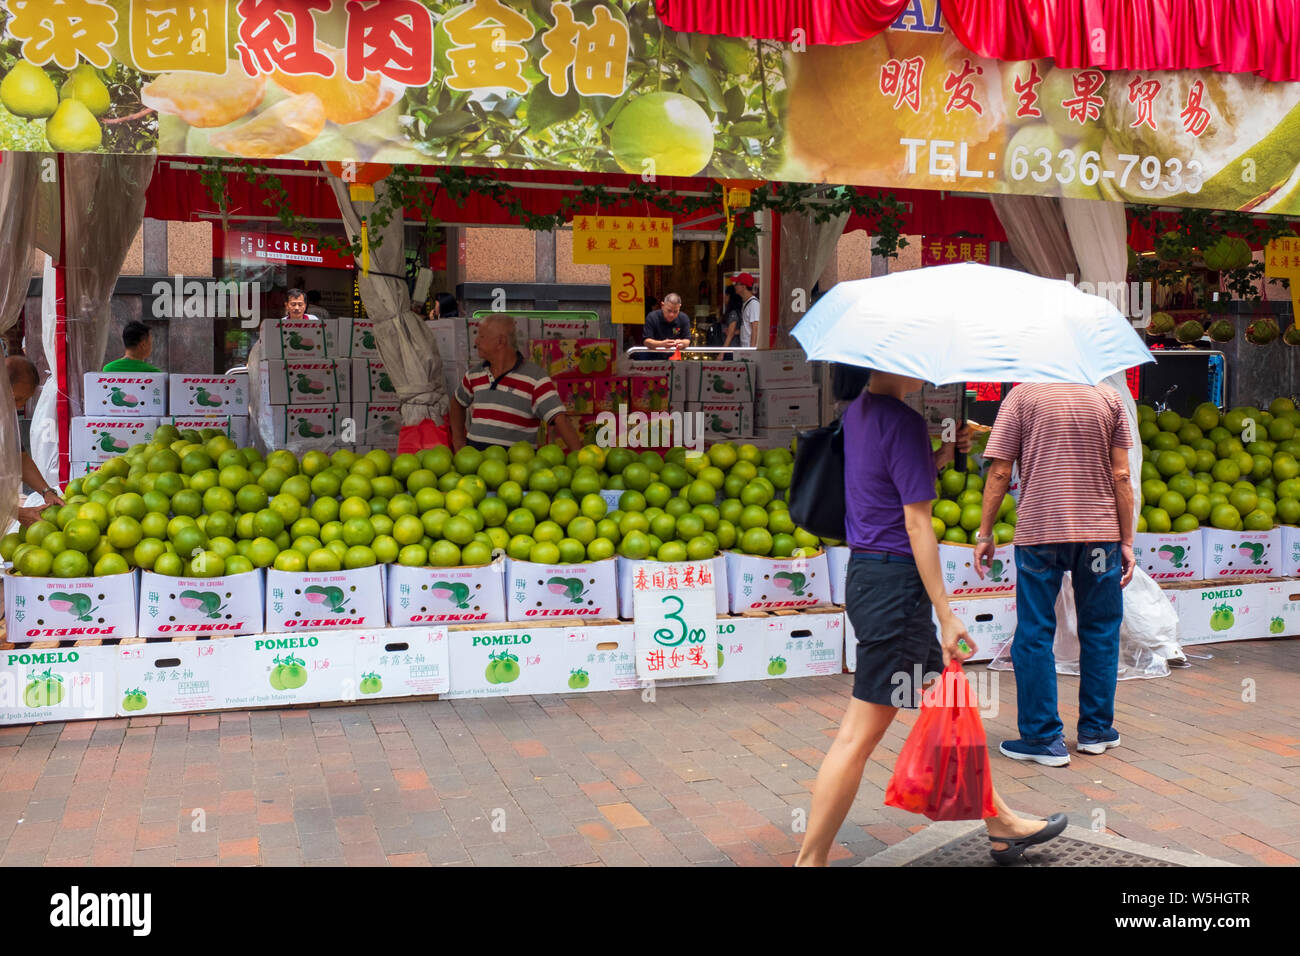 Woman with umbrella walking past stall of green melons for sale at street market in Waterloo St, Singapore Stock Photo